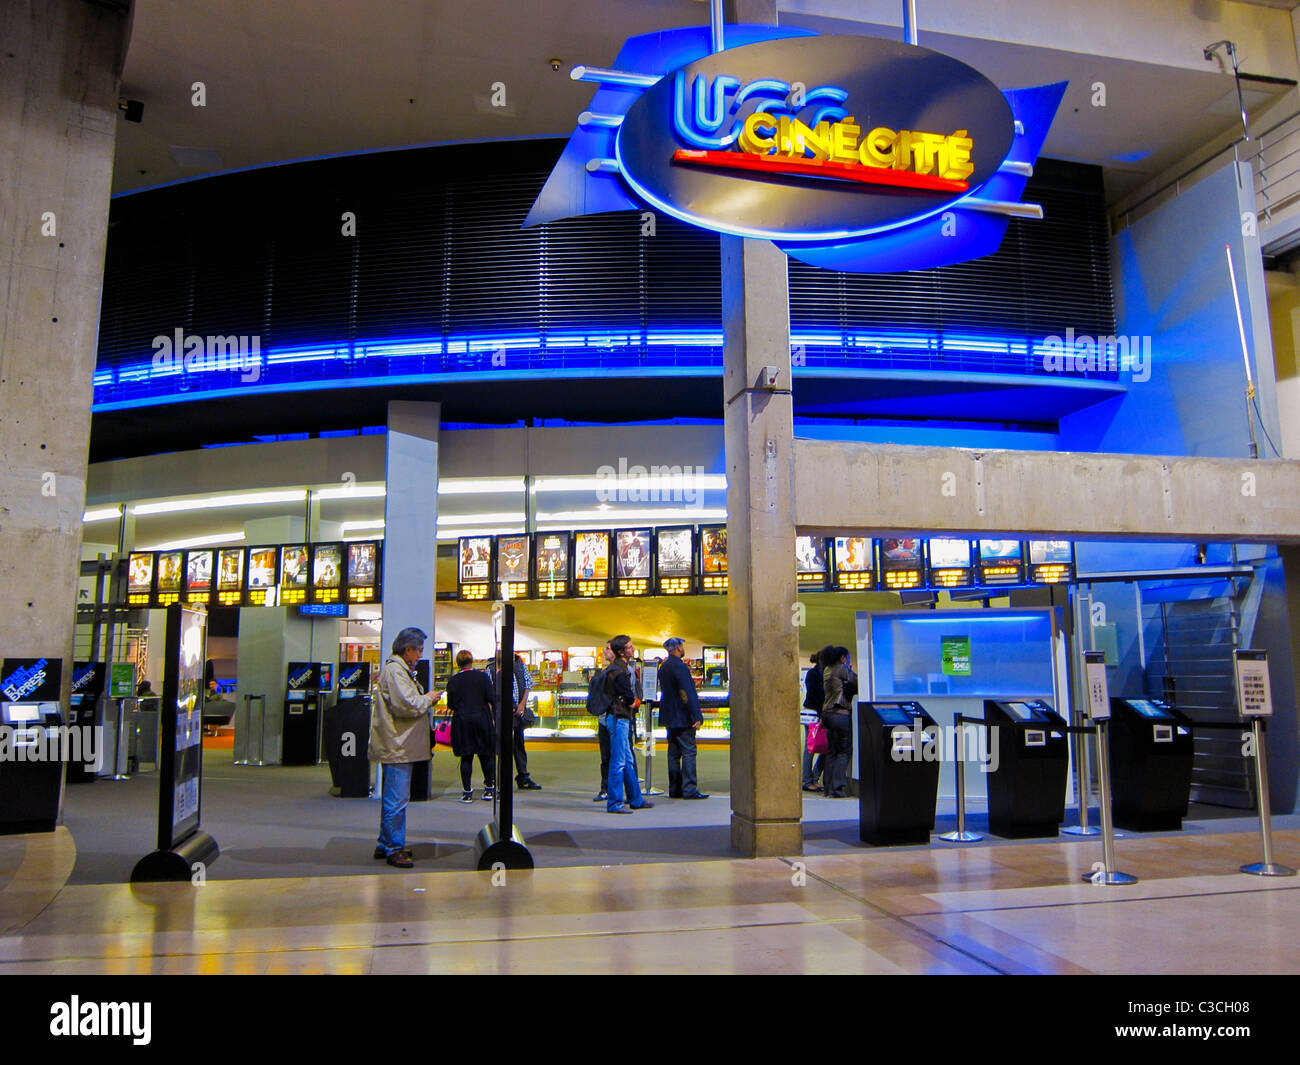 Paris, France, Entrance to  UGC Ciné Cite, French Cinema Complex inside 'Le Forum des halles' Shopping Center ,Sign, inside, movie theater lobby, modern building interior Stock Photo